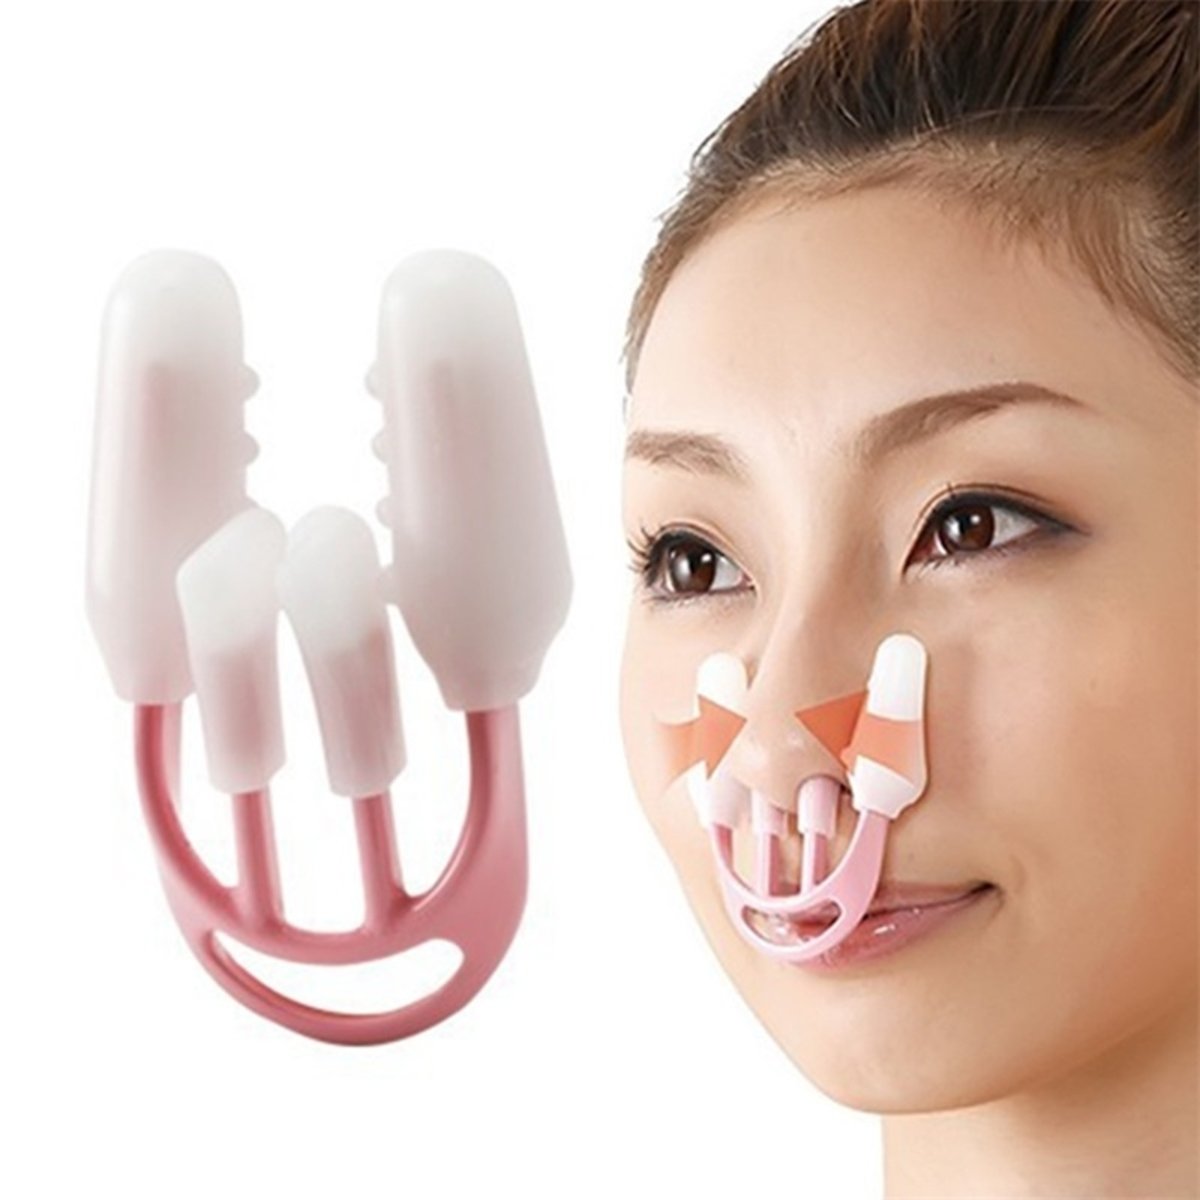 Magic Nose Up Lifting Shaping Bridge Nose Shaper and Straightener corrector for Women nose Slimming Device Shaping Tool for Men